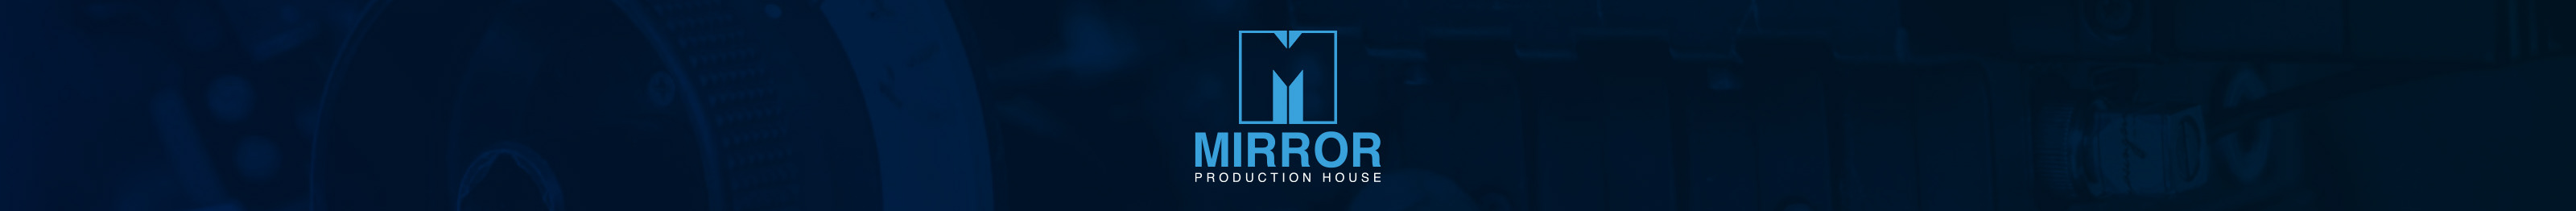 Mirror Production House's profile banner